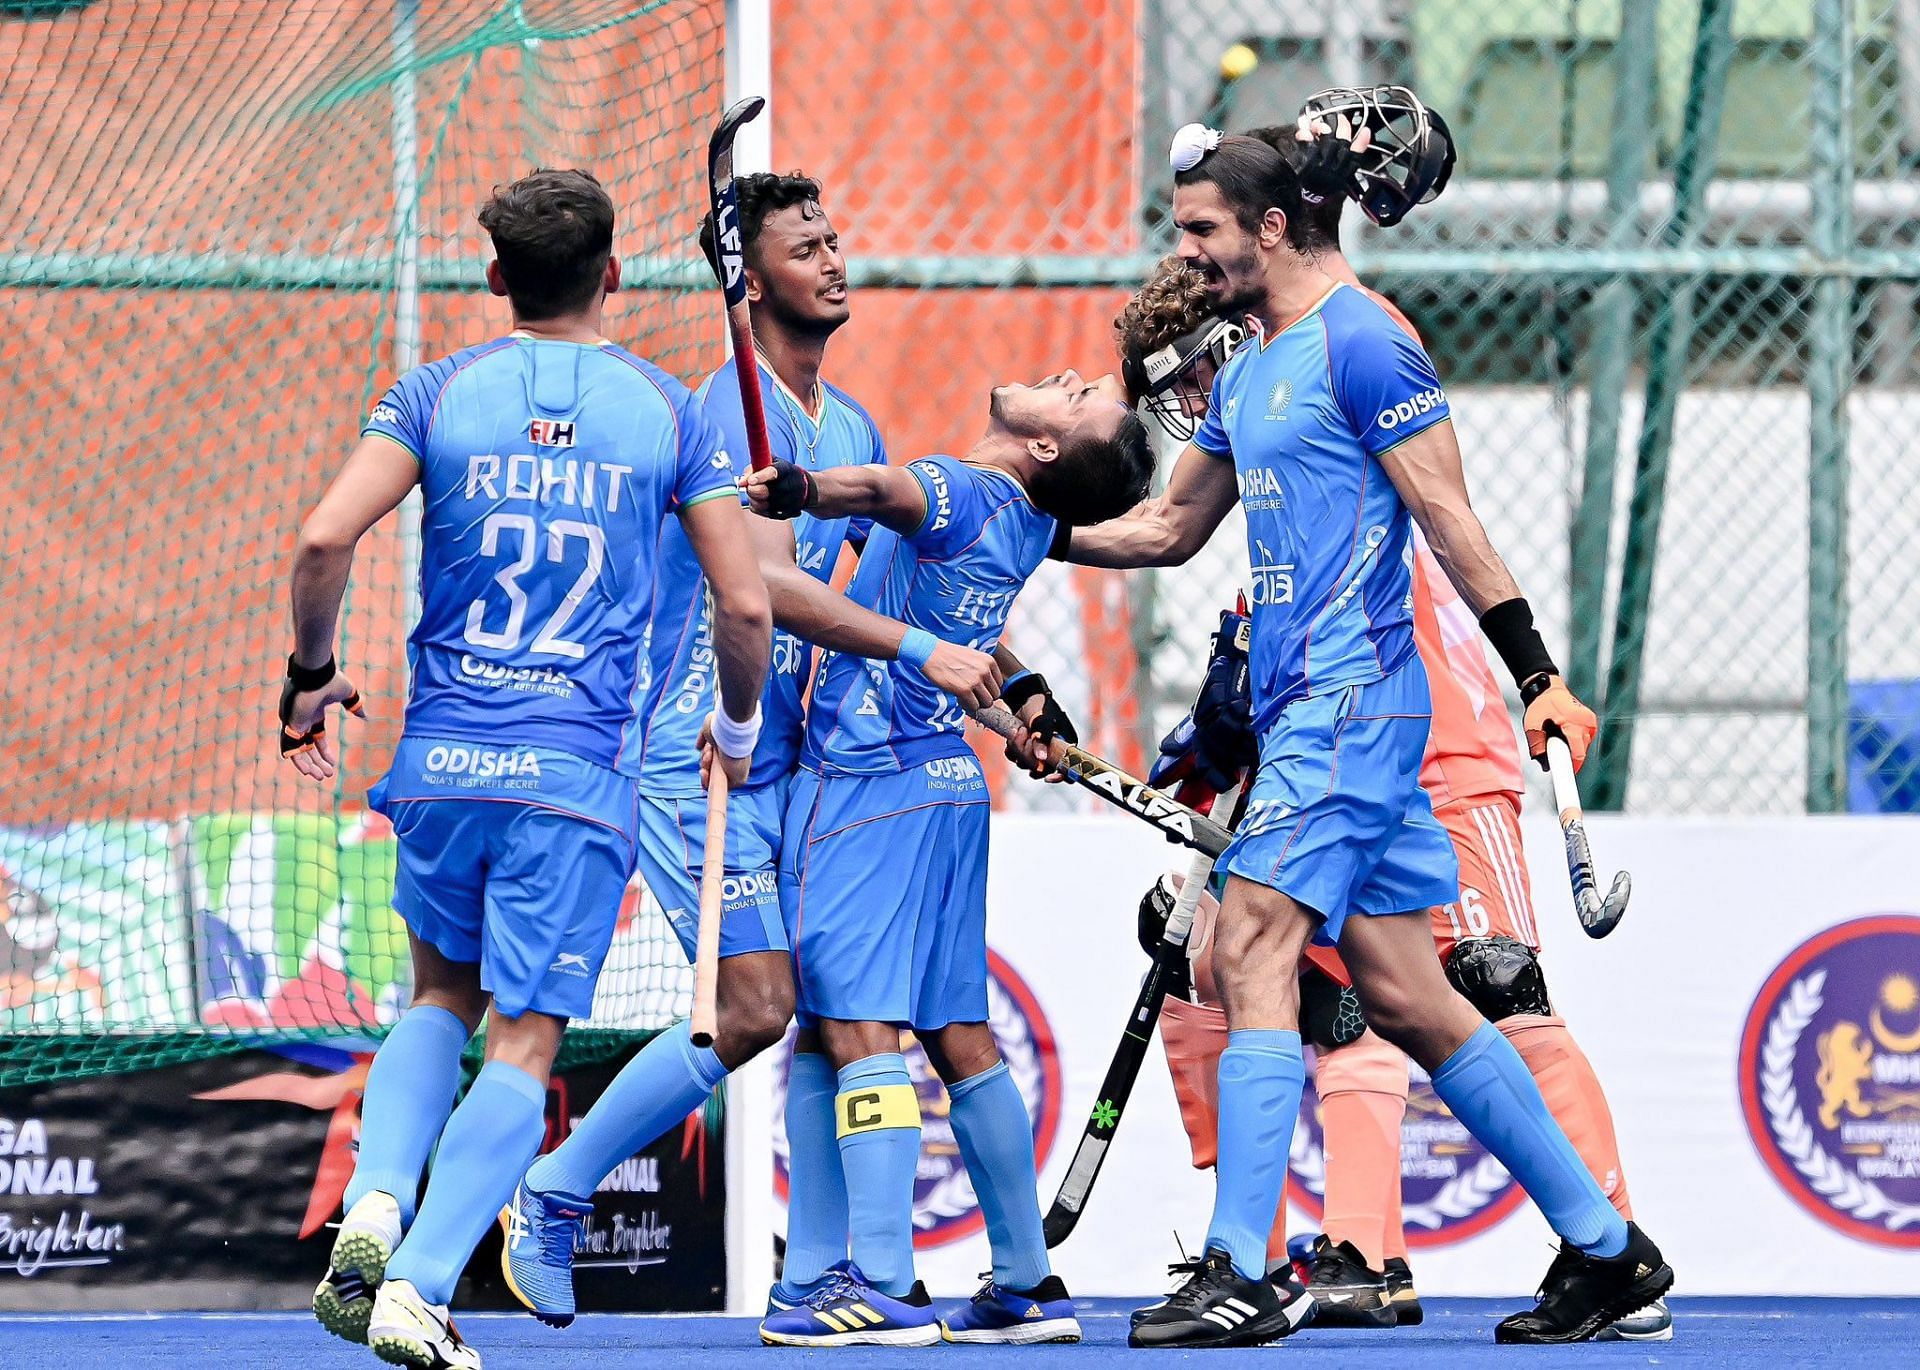 India beat Netherlands 4-3 to enter semi-finals of Junior World Cup. 